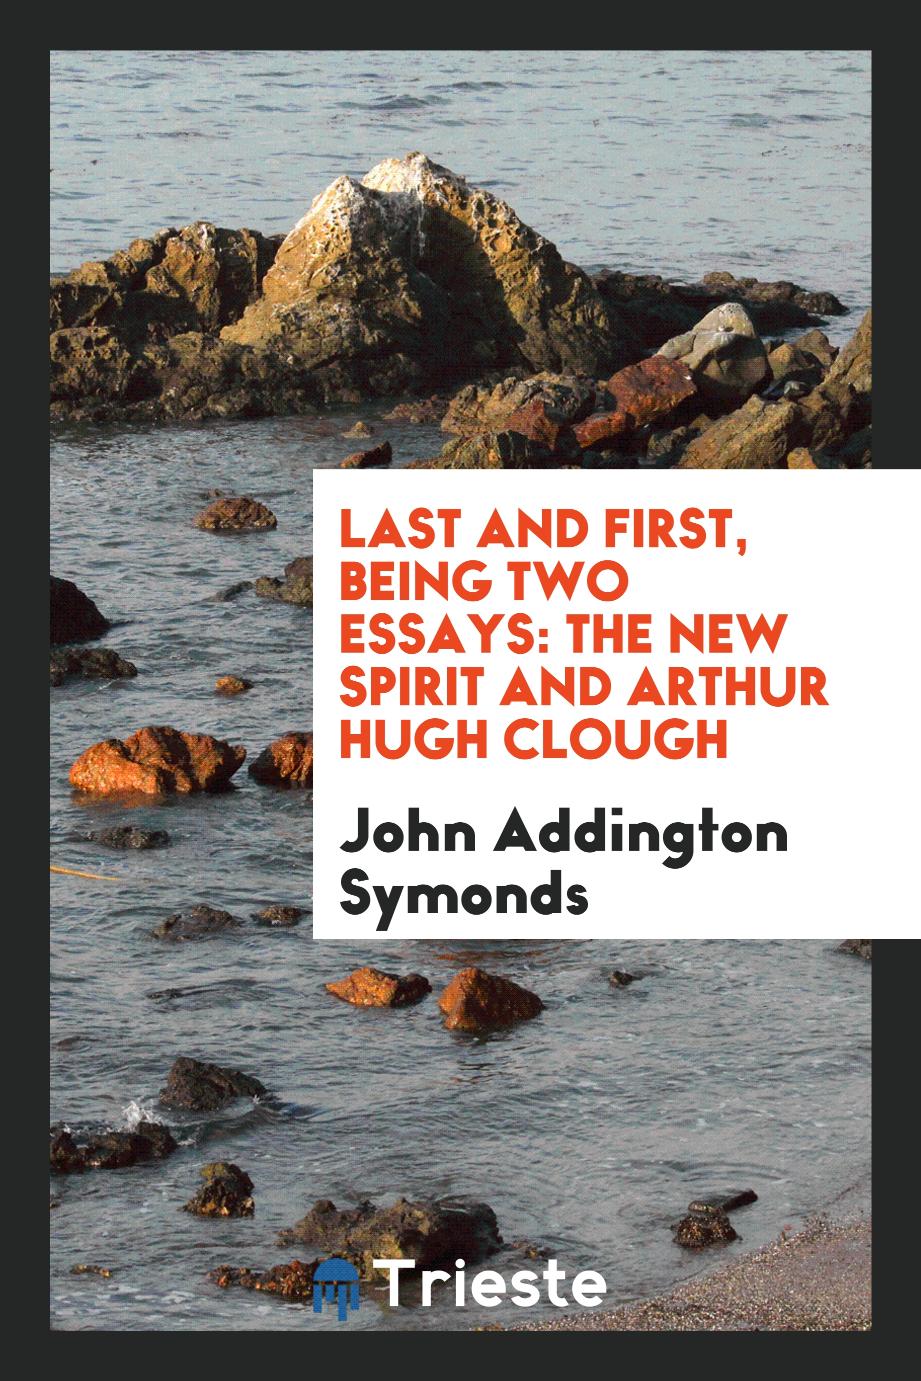 Last and First, Being Two Essays: The New Spirit and Arthur Hugh Clough